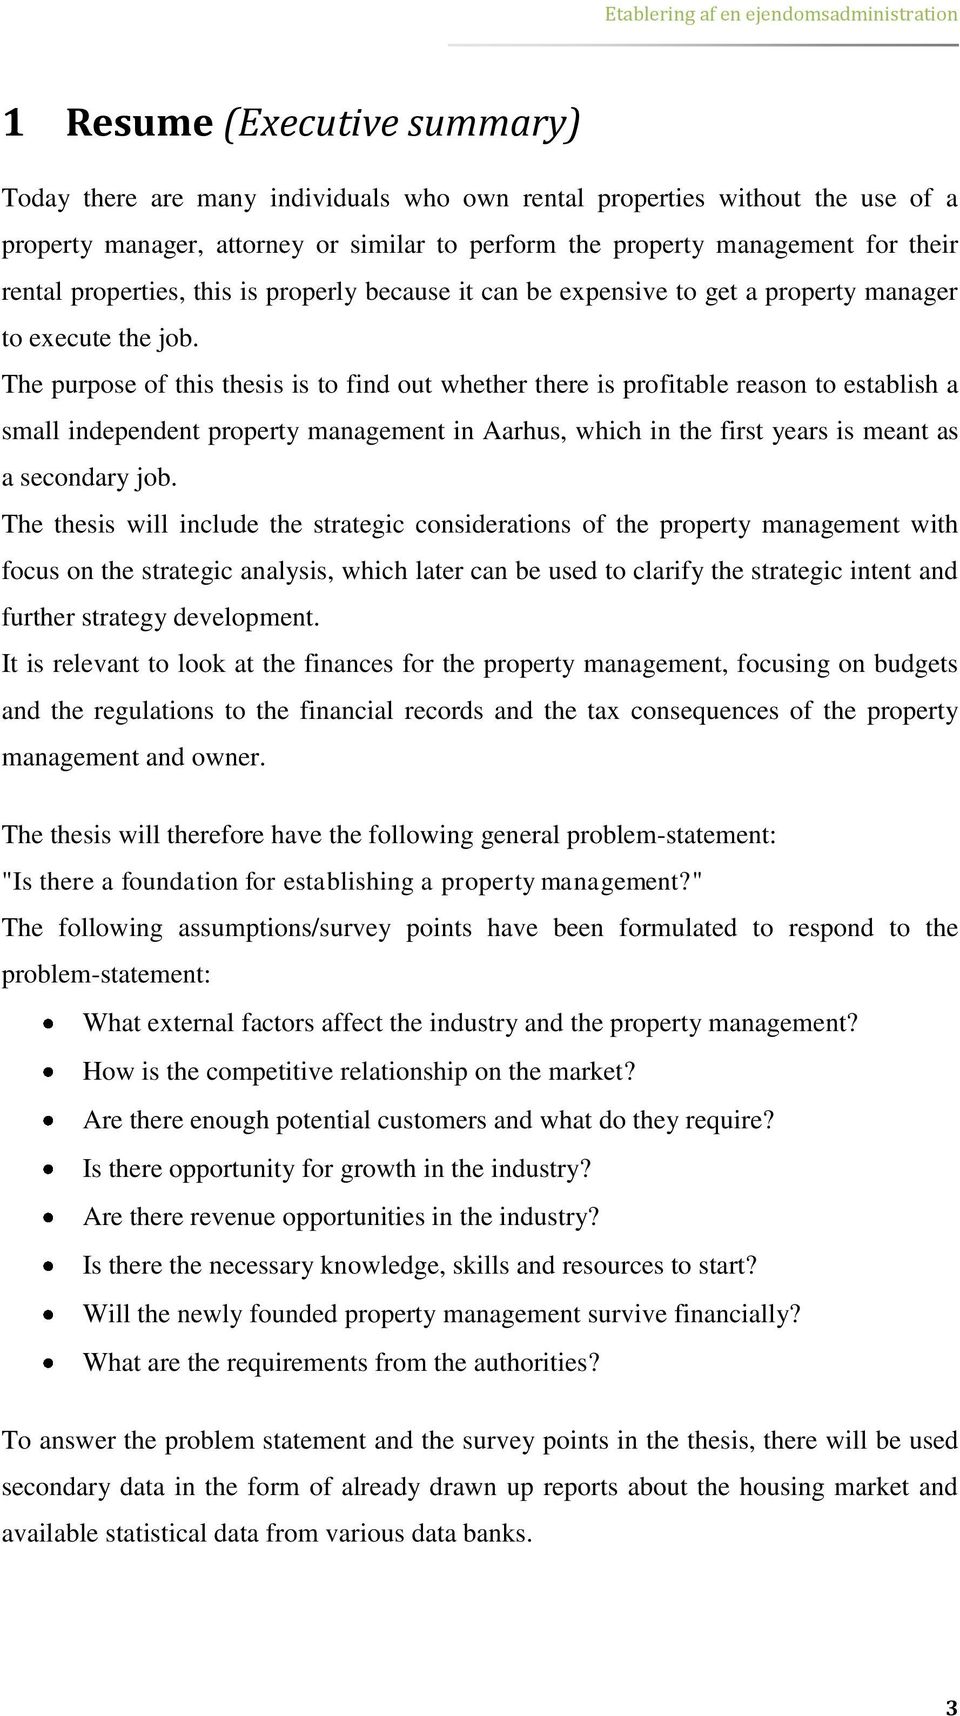 The purpose of this thesis is to find out whether there is profitable reason to establish a small independent property management in Aarhus, which in the first years is meant as a secondary job.